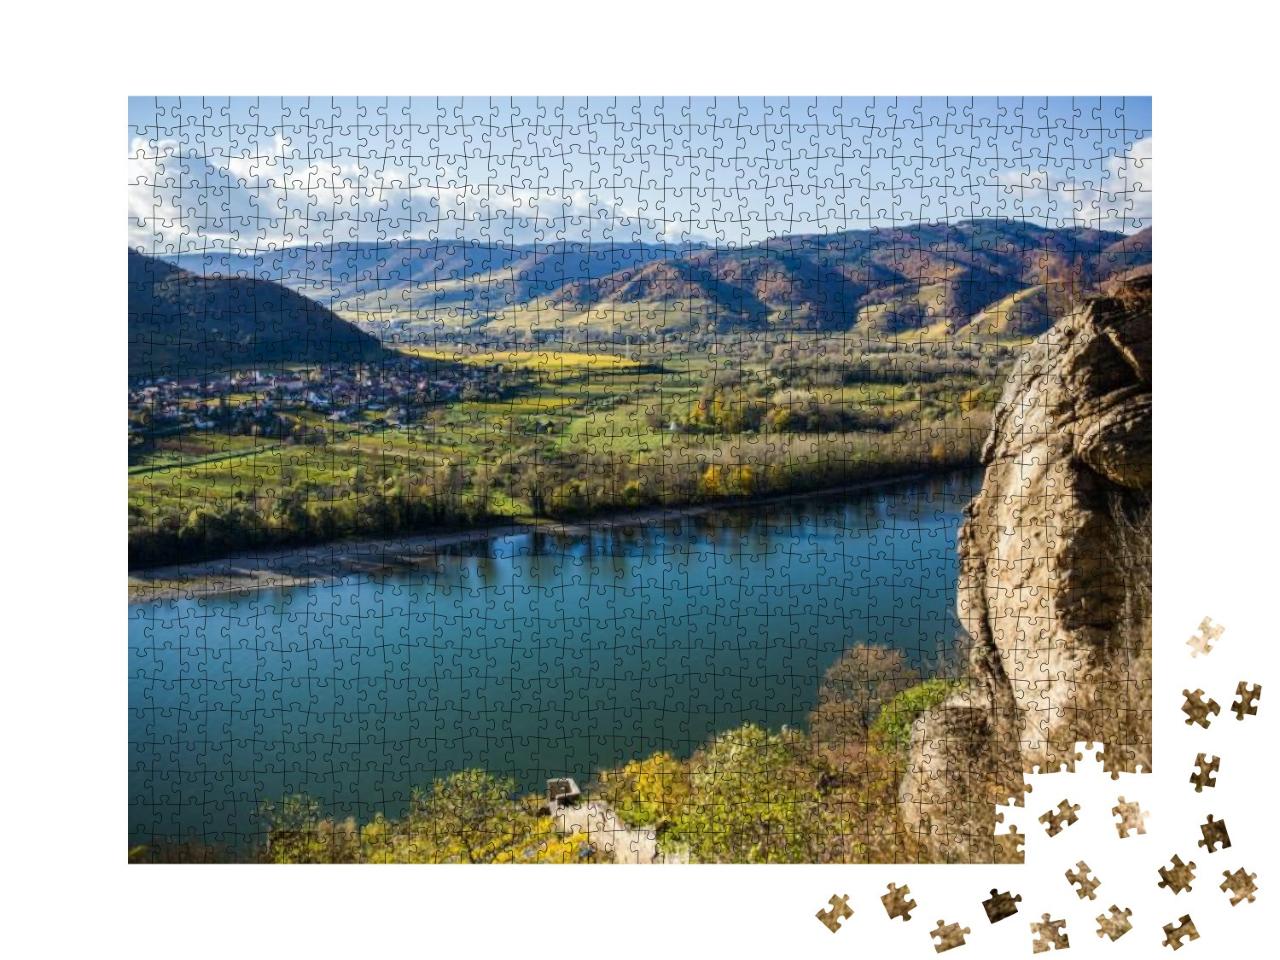 Landscape of Wachau Valley, Danube River, Austria... Jigsaw Puzzle with 1000 pieces